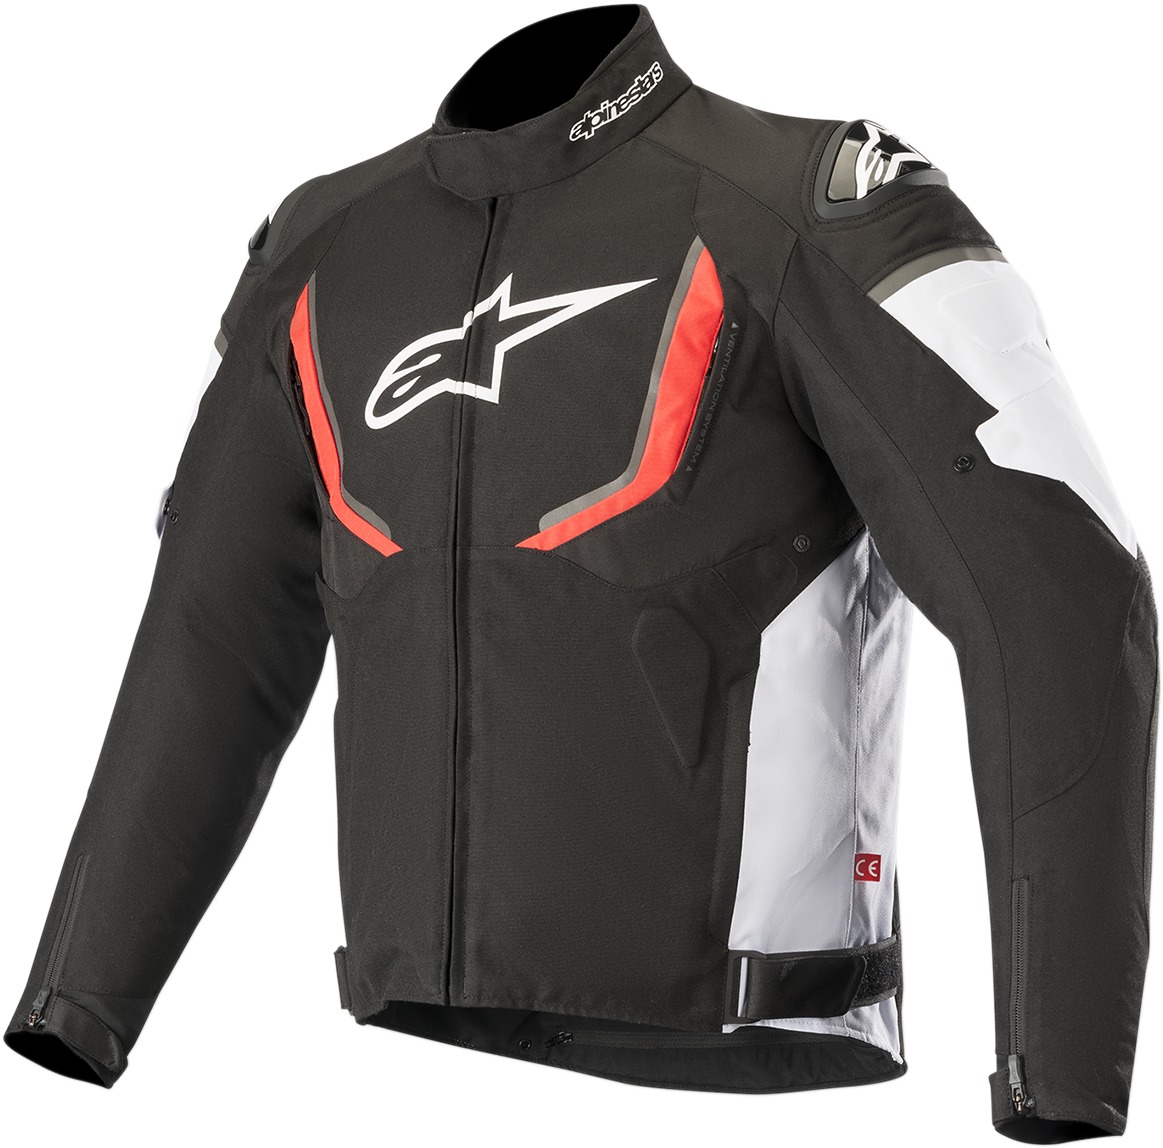 T-GPR V2 Street Riding Jacket Black/Red/White US 2X-Large - Click Image to Close